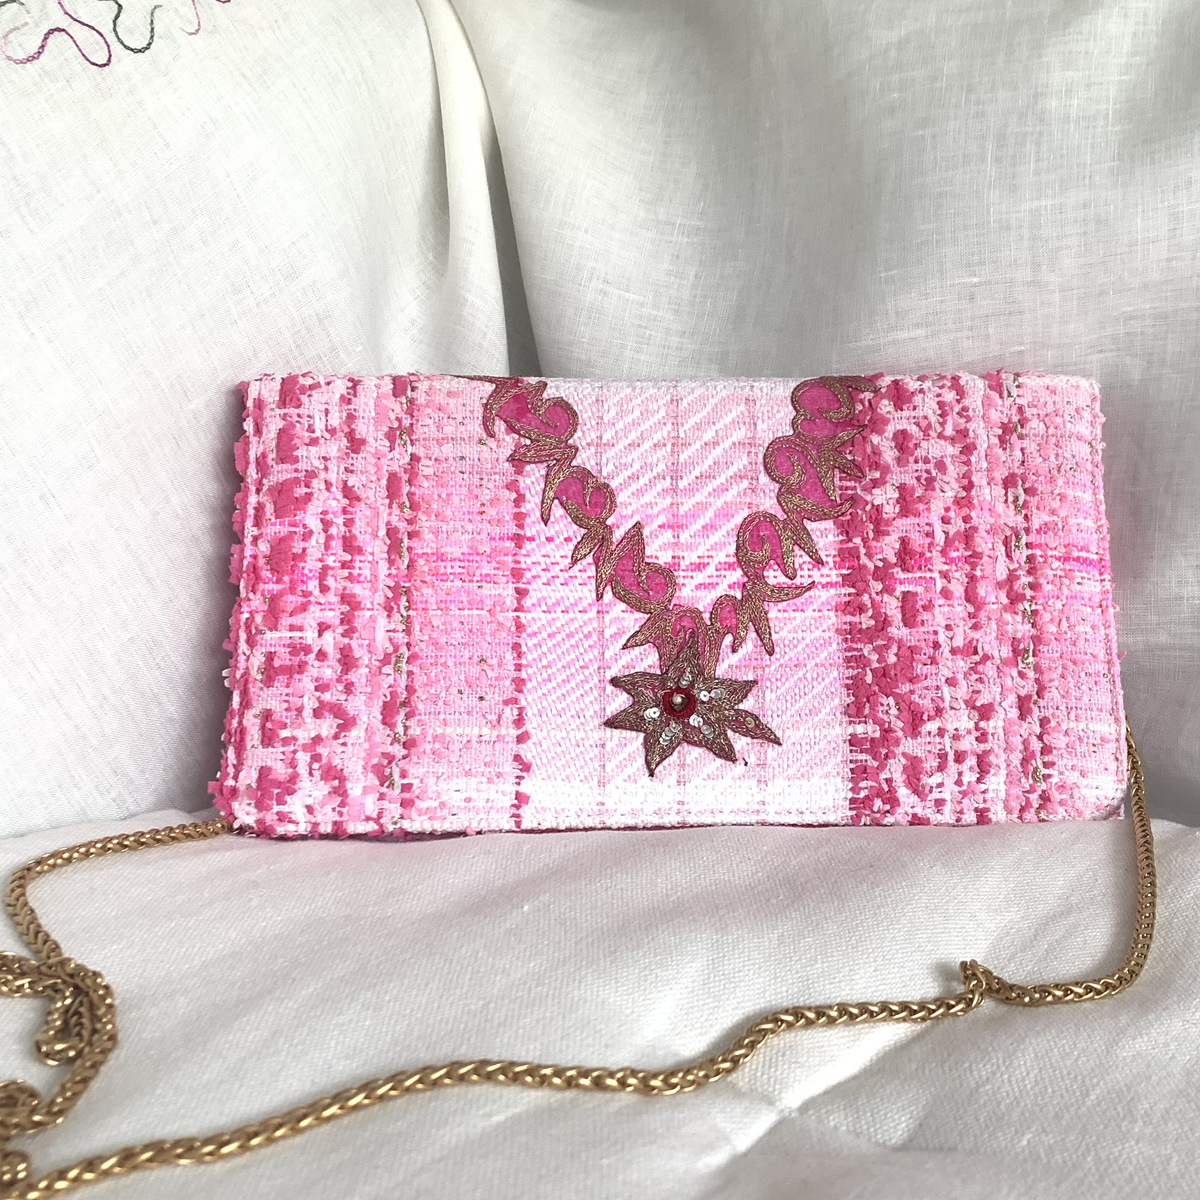 Haute Couture Fuchsia Pink Tweed Handcrafted Clutch - Ethical, Made in Lebanon